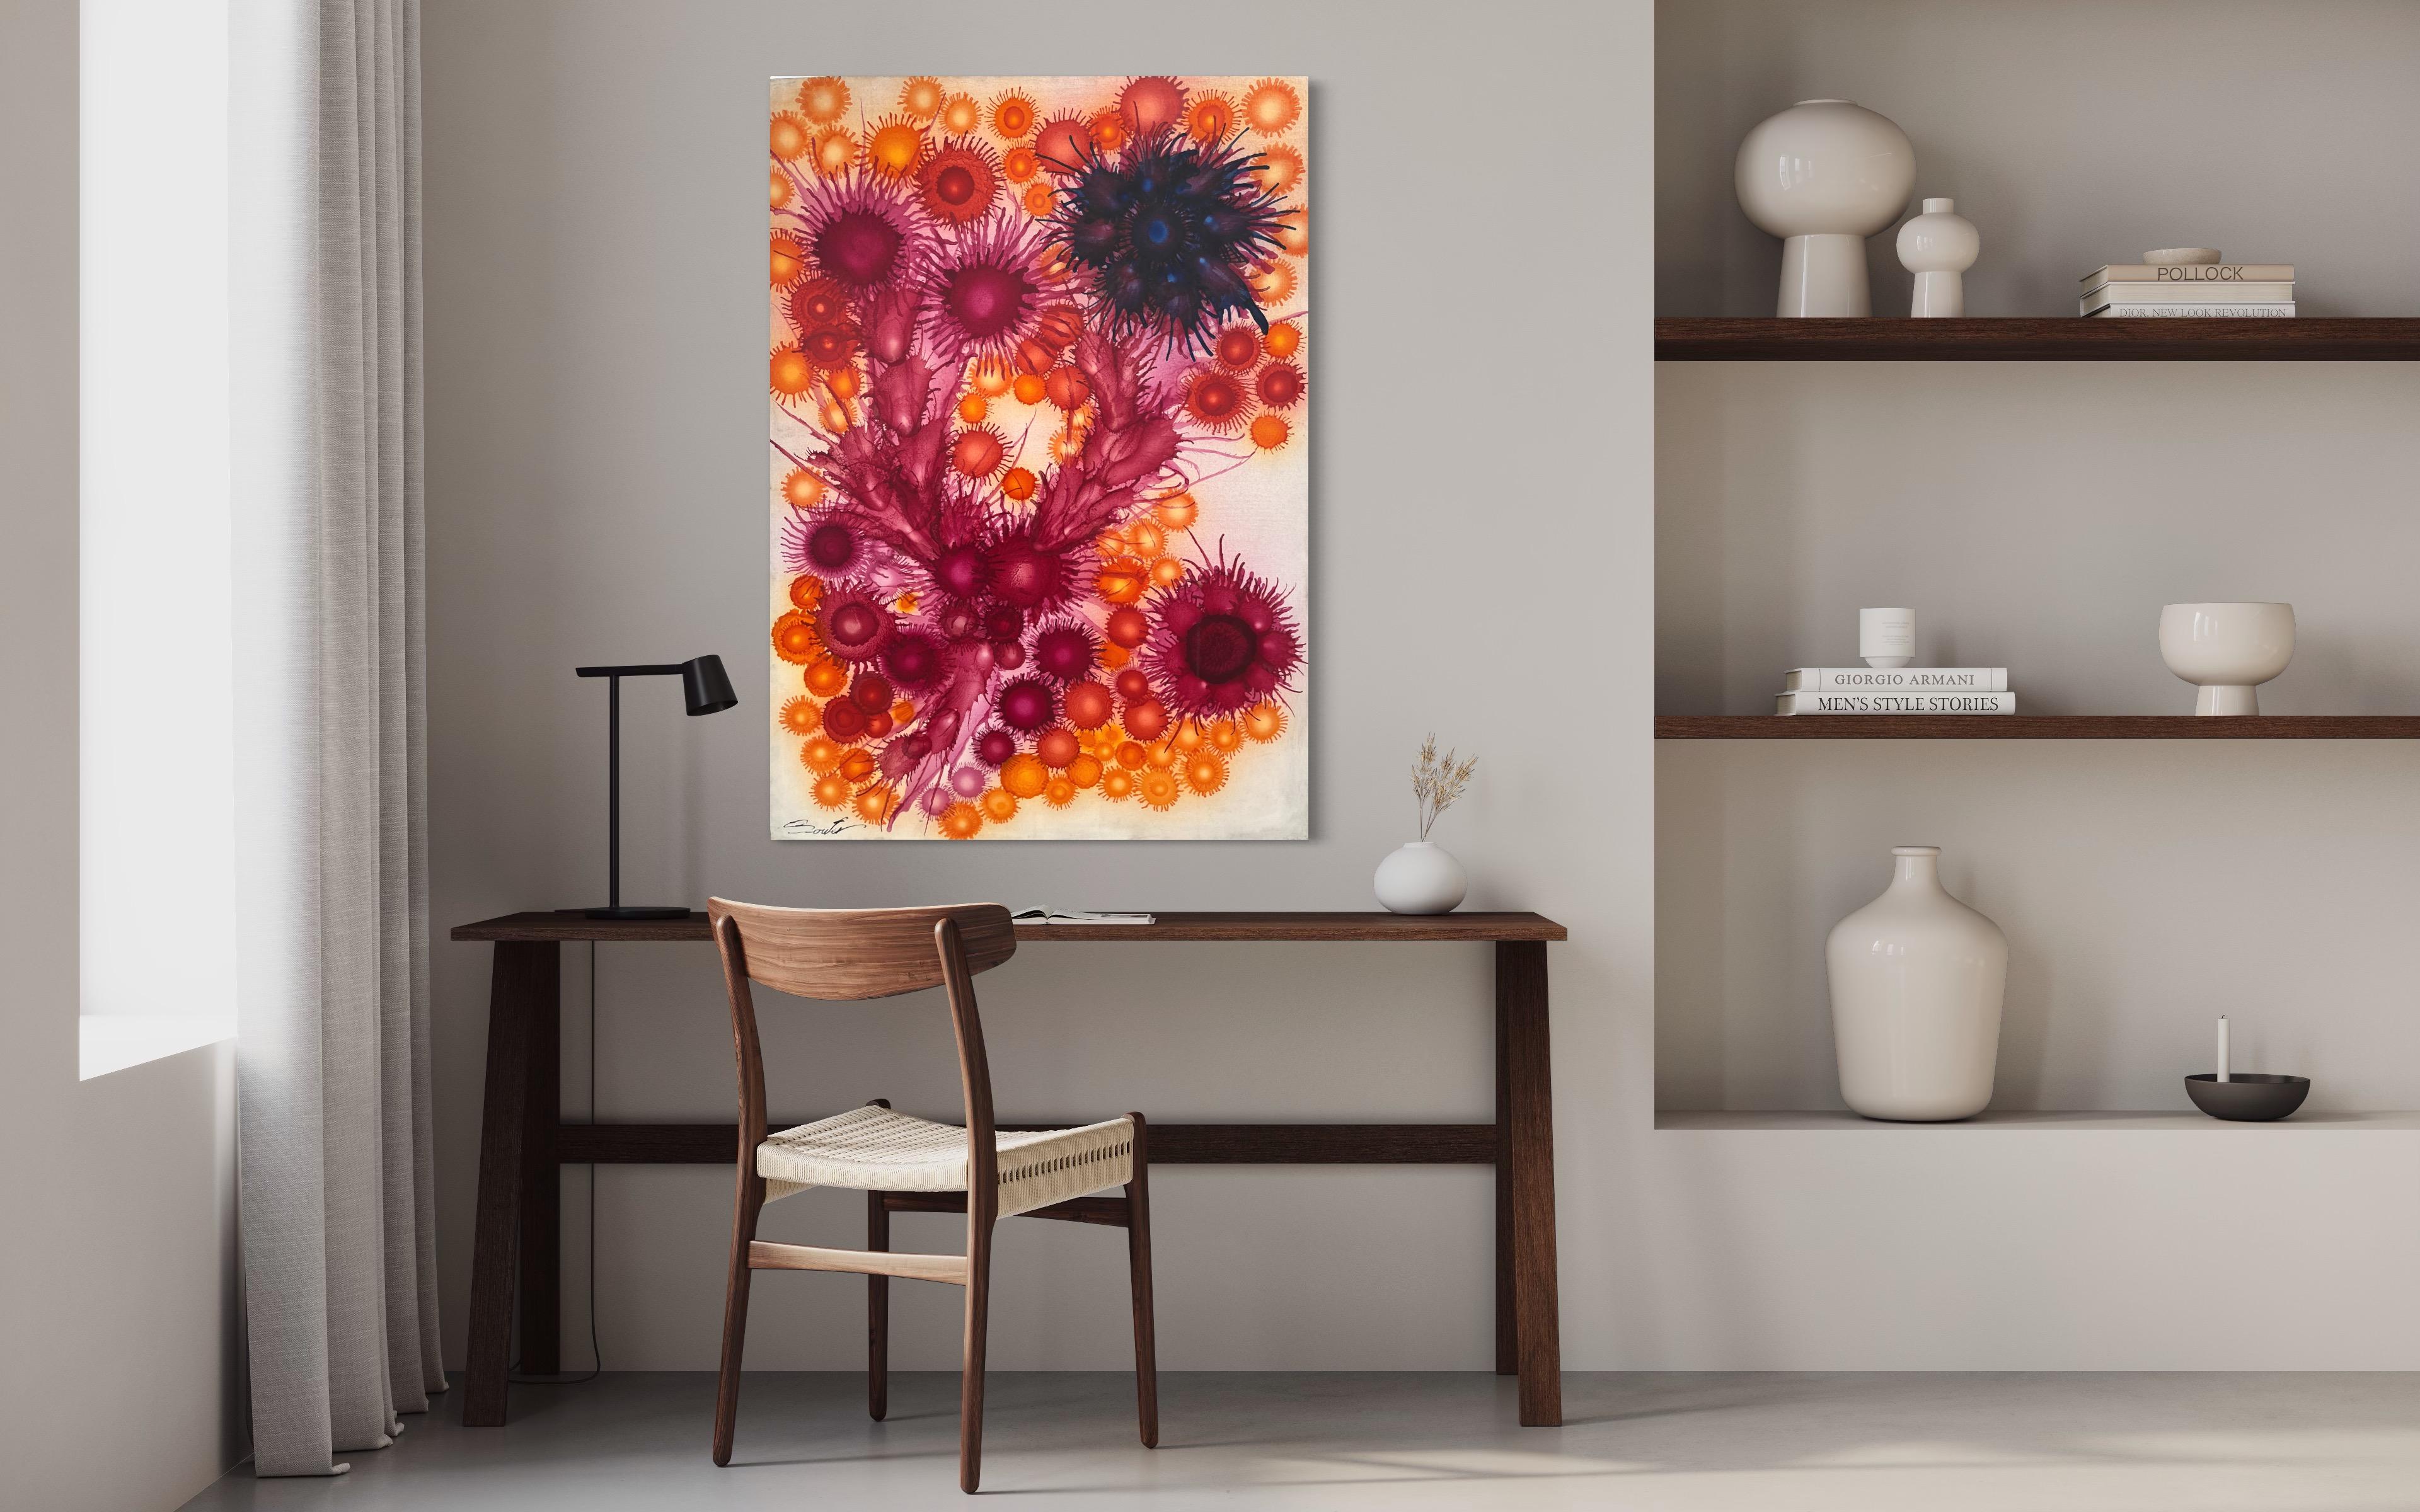 This abstract painting truly showcases the artist’s imaginative vision. The use of biomorphic shapes in vibrant red, orange, and burnt umber tones adds to the abstract nature of the painting. These colors evoke a sense of energy, passion, and